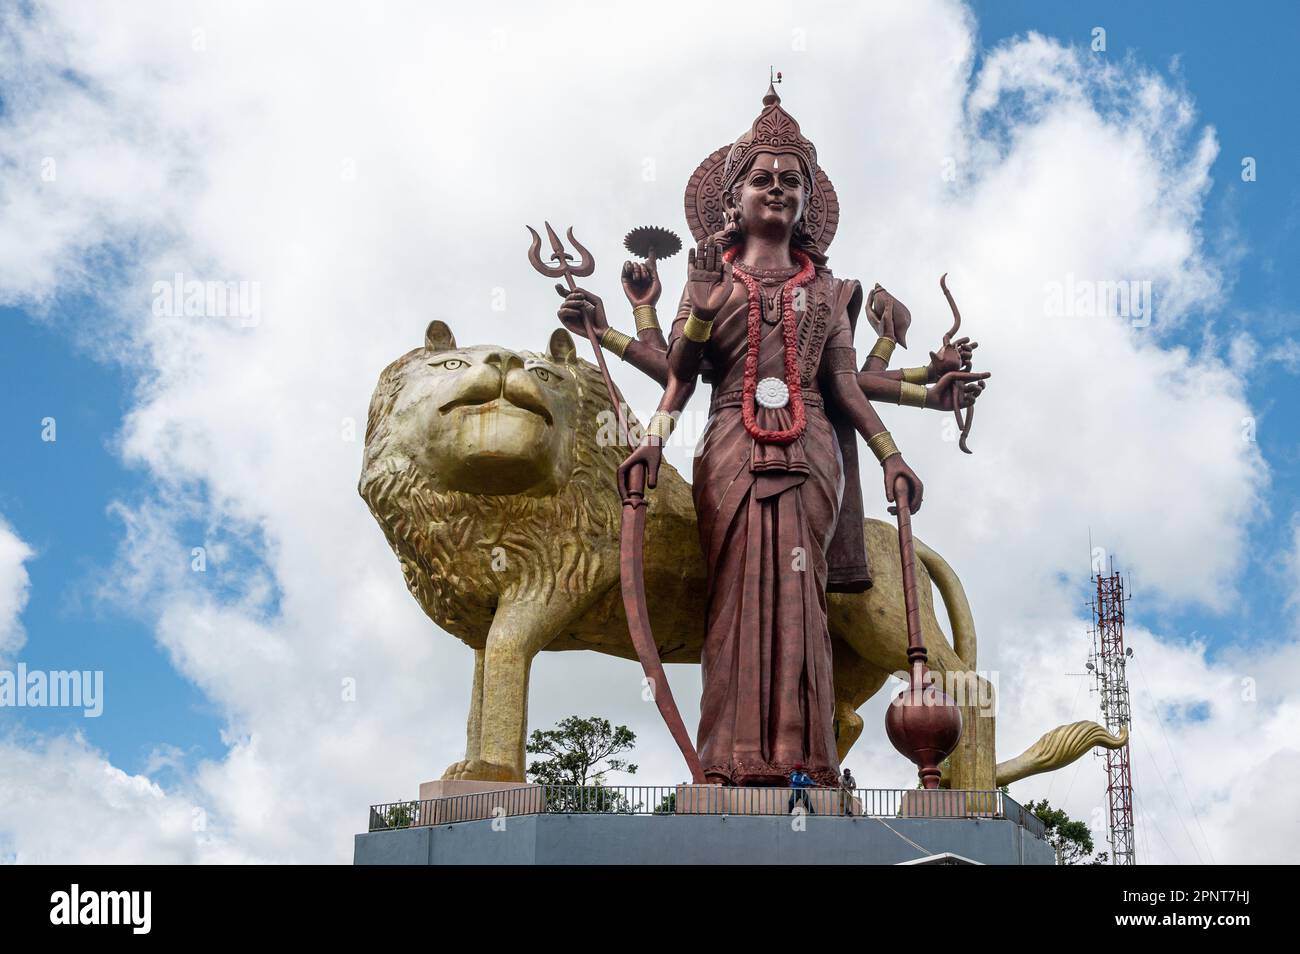 Murti of Durga Maa, Mother Goddess Durga, with golden lion at the entrance to the Ganga Talao Temple at Grand Bassin, Mauritius, Africa Stock Photo